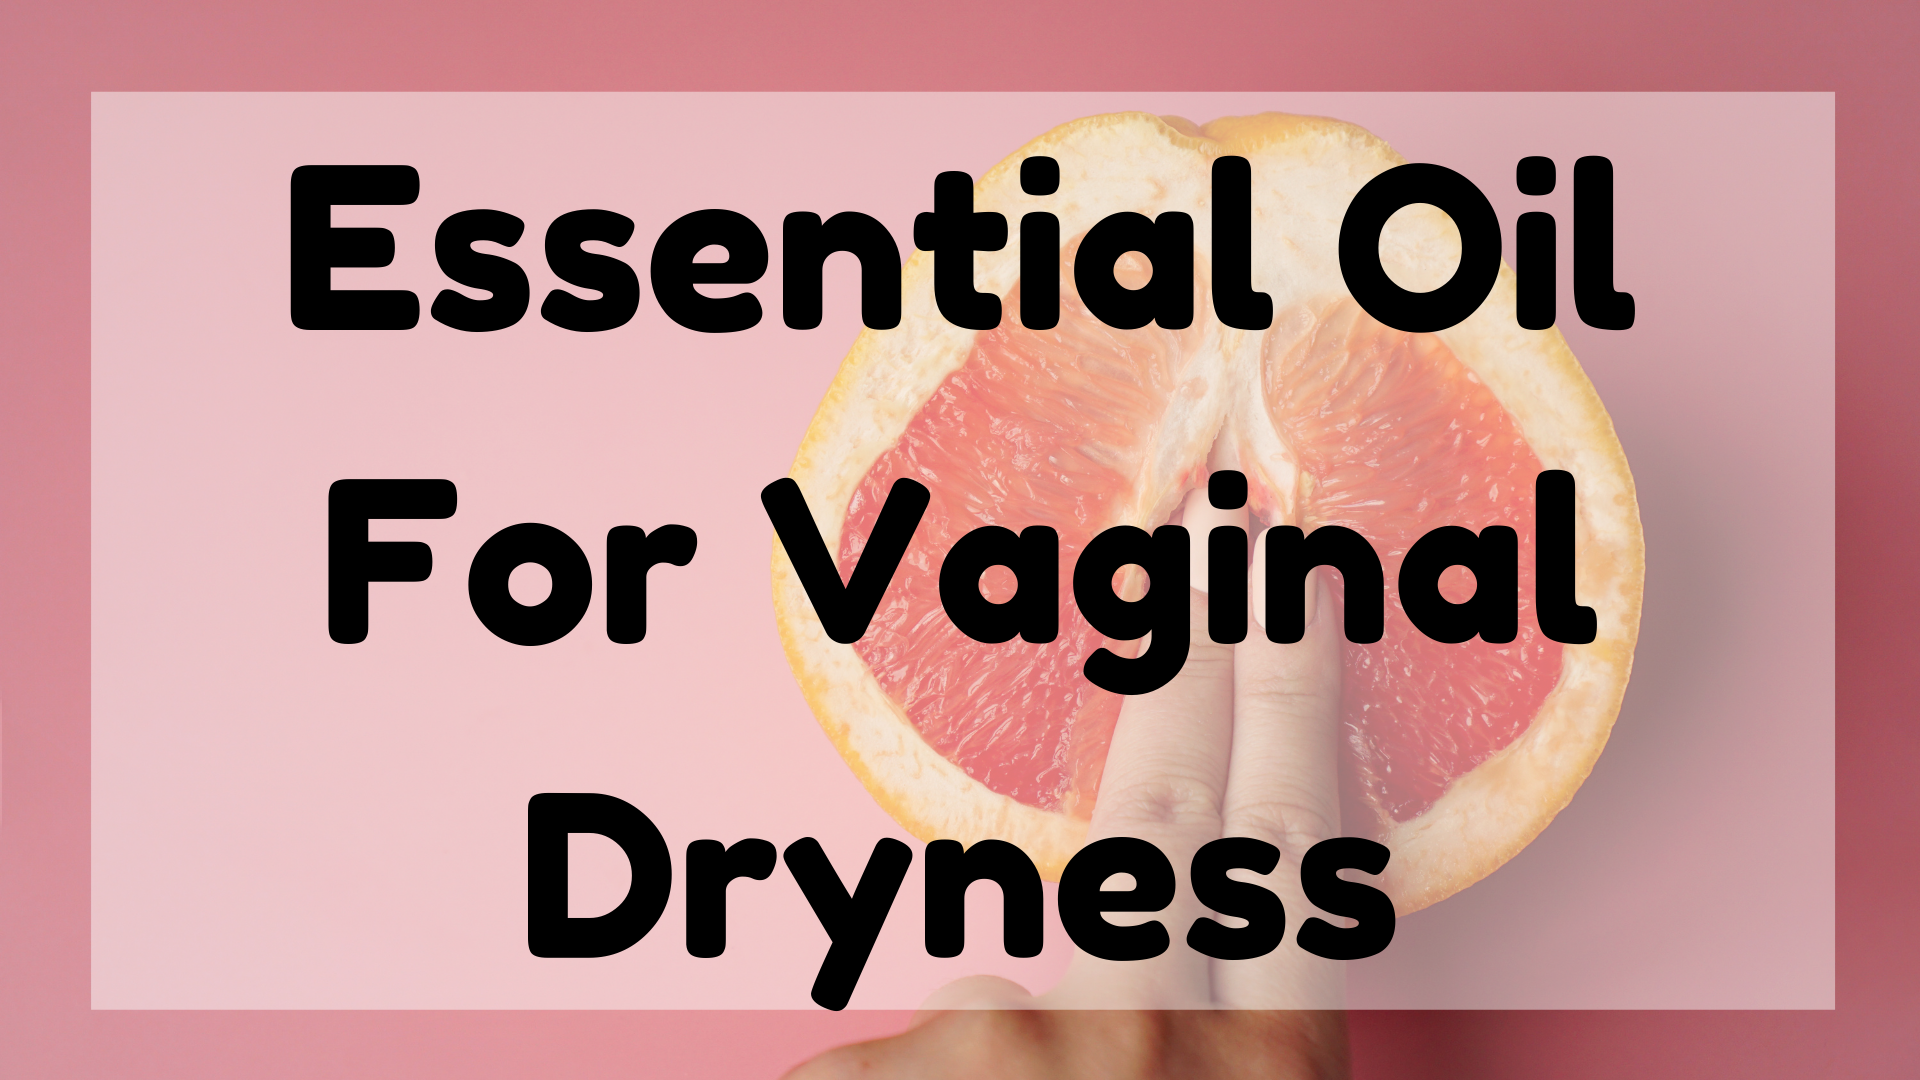 Essential Oil For Vaginal Dryness